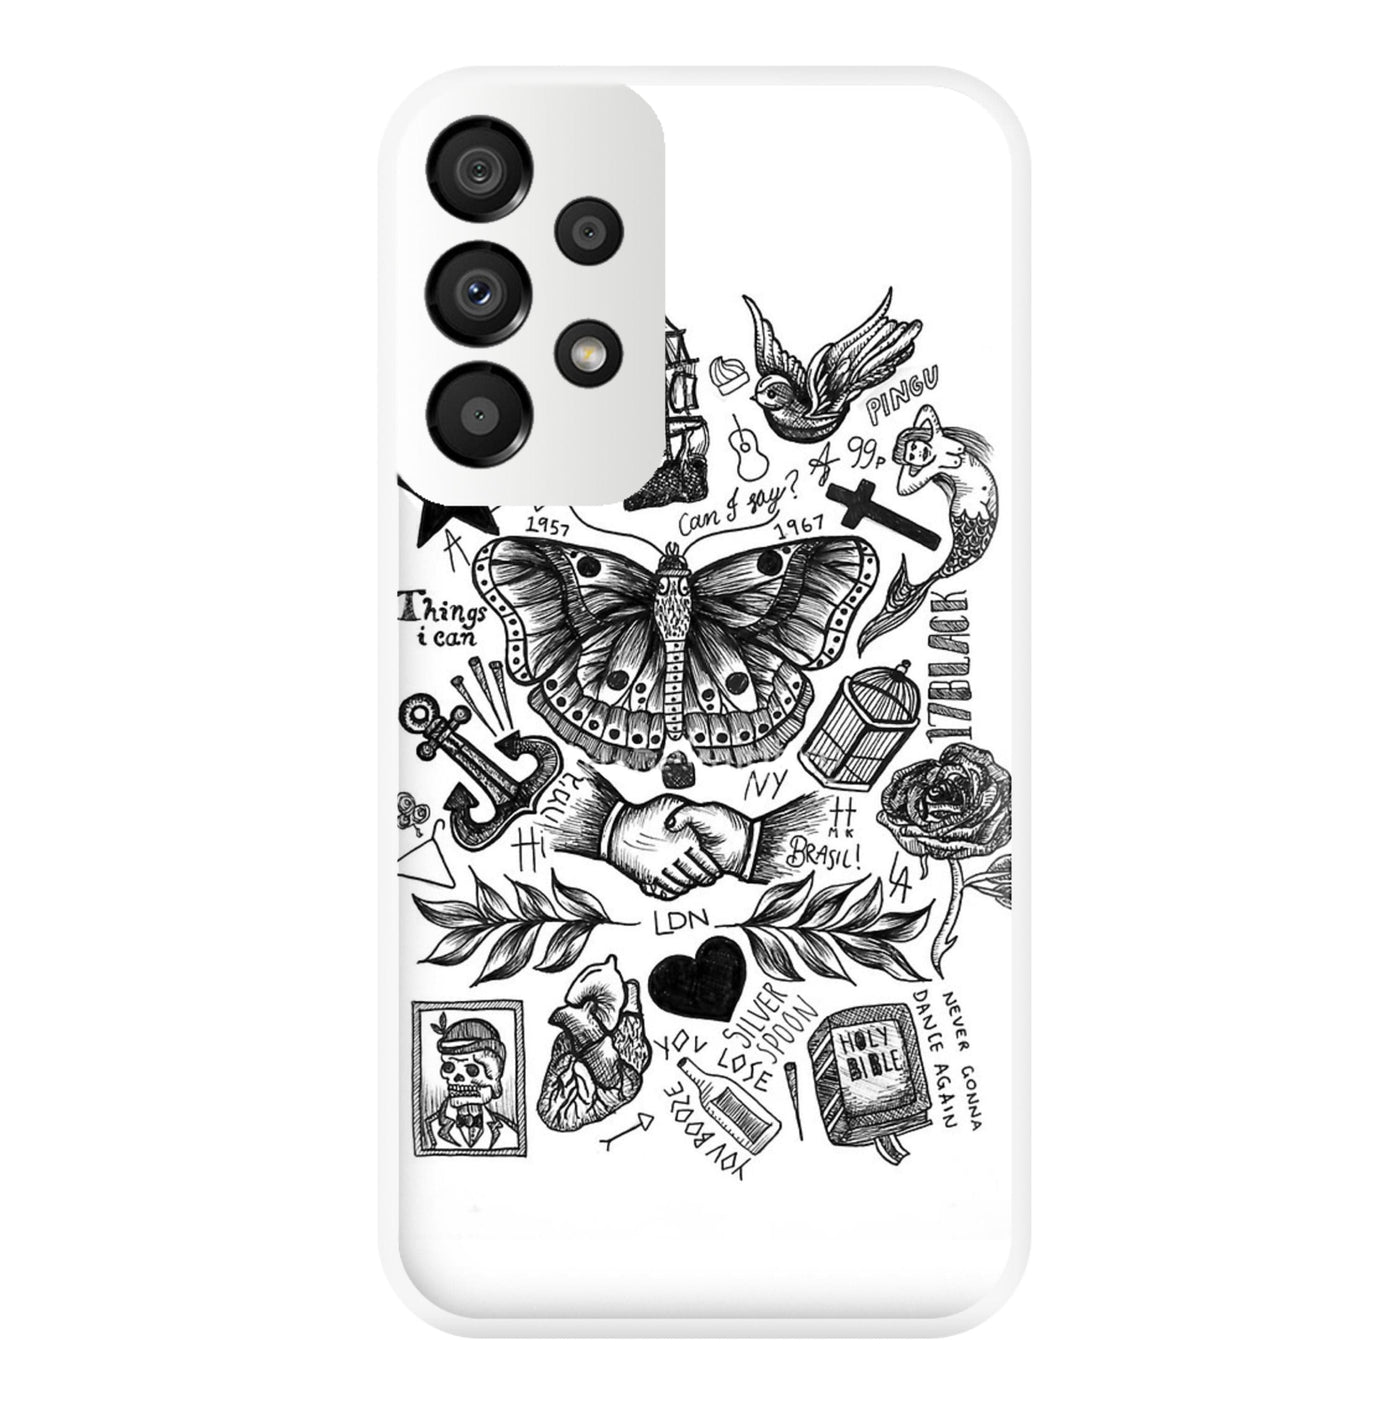 Harry Style's Tattoos Phone Case